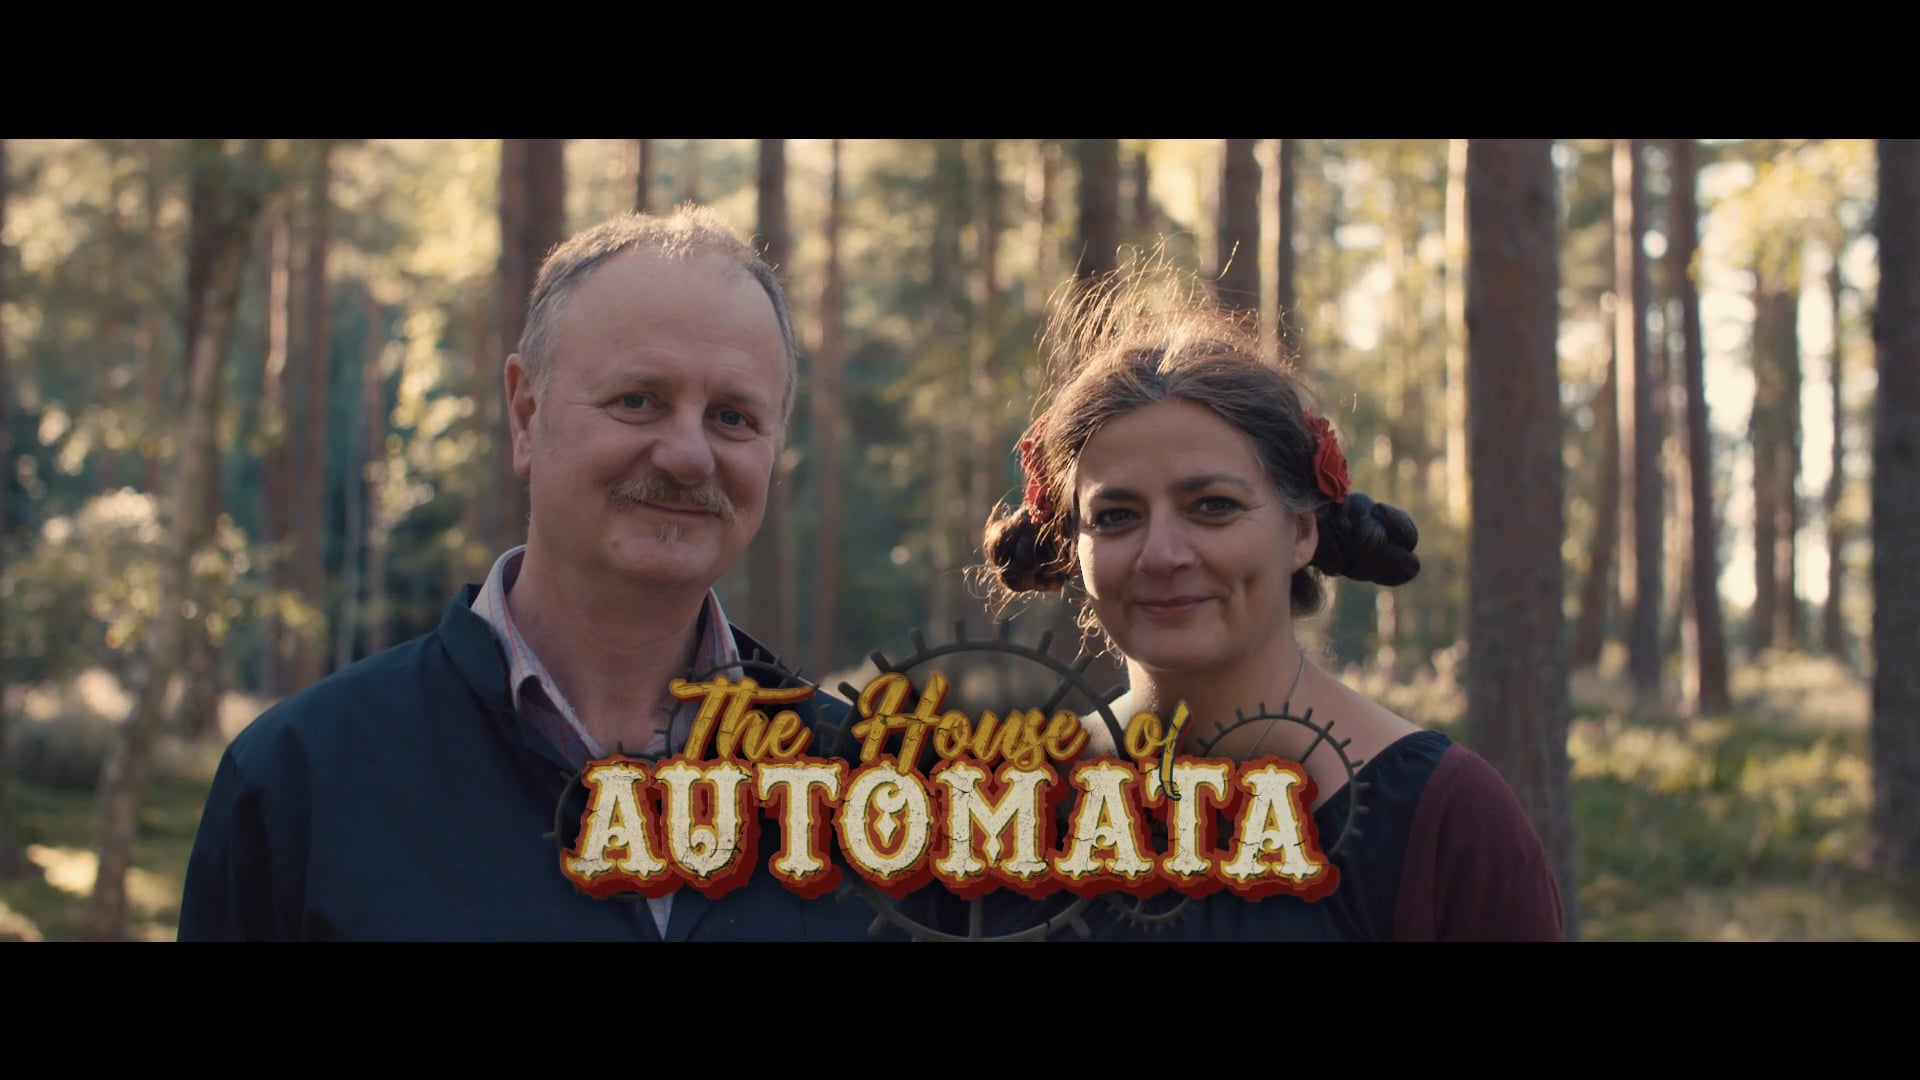 The House of Automata